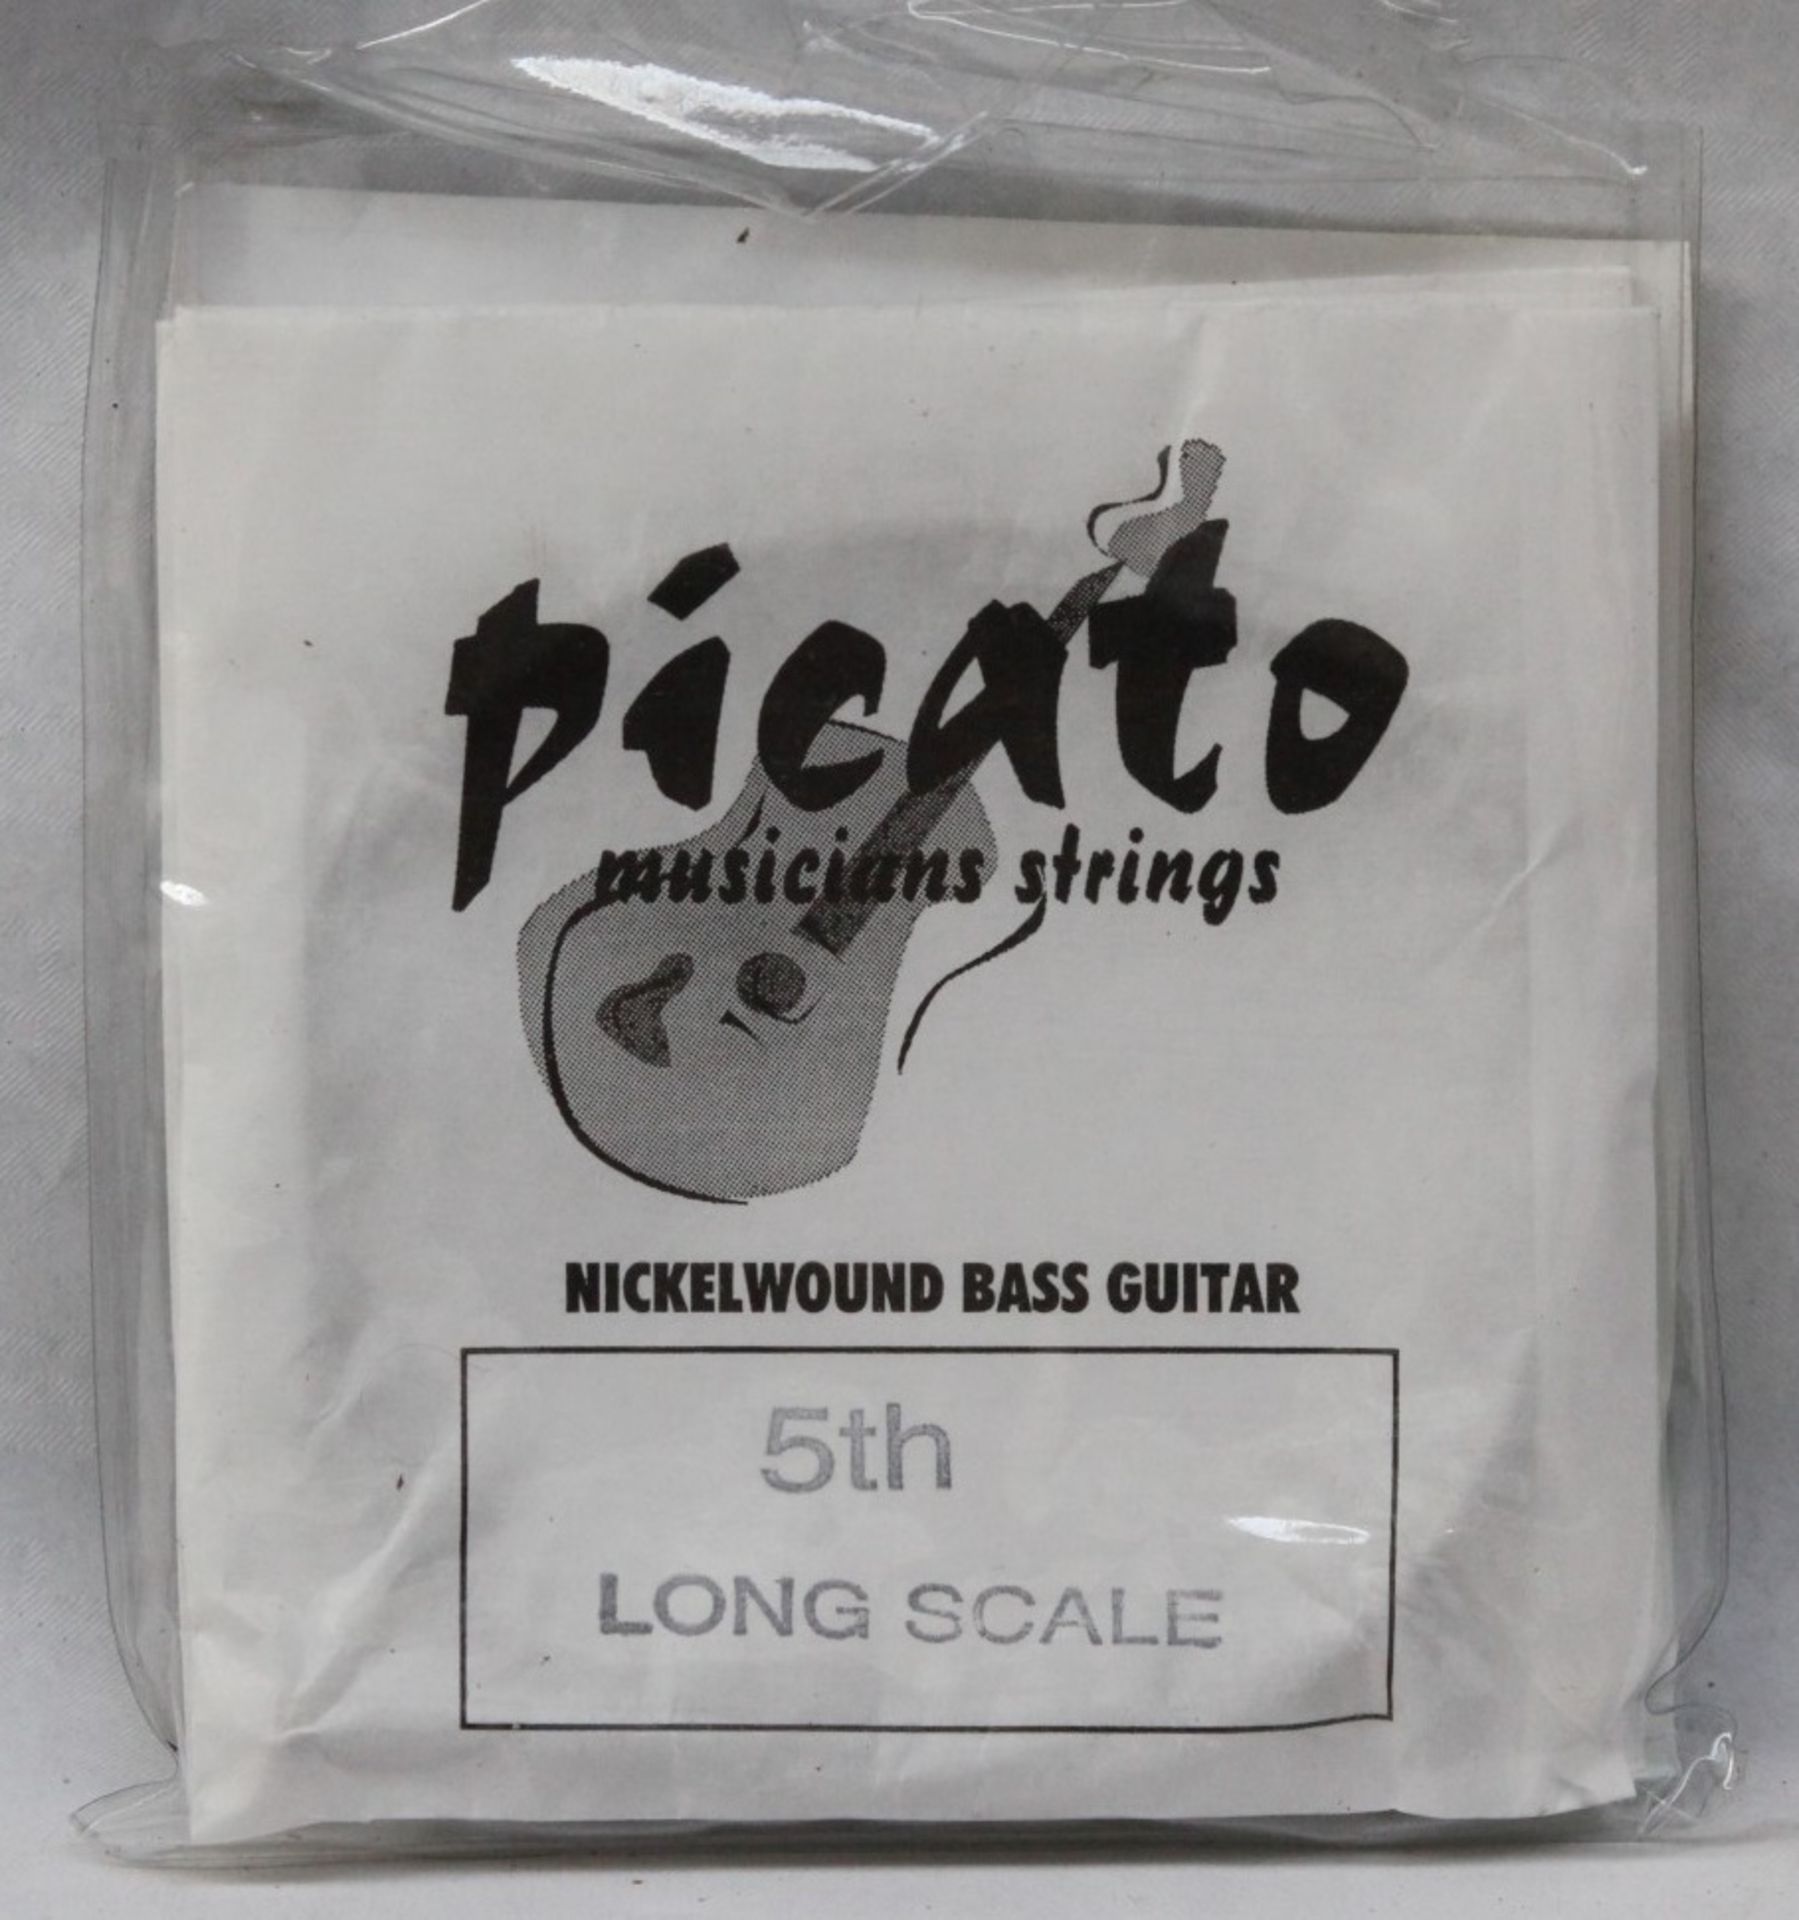 1 x Set of Picato 735's Nickel Roundwould Longscale 5 String Bass Strings - Made in the UK - Brand - Image 2 of 2